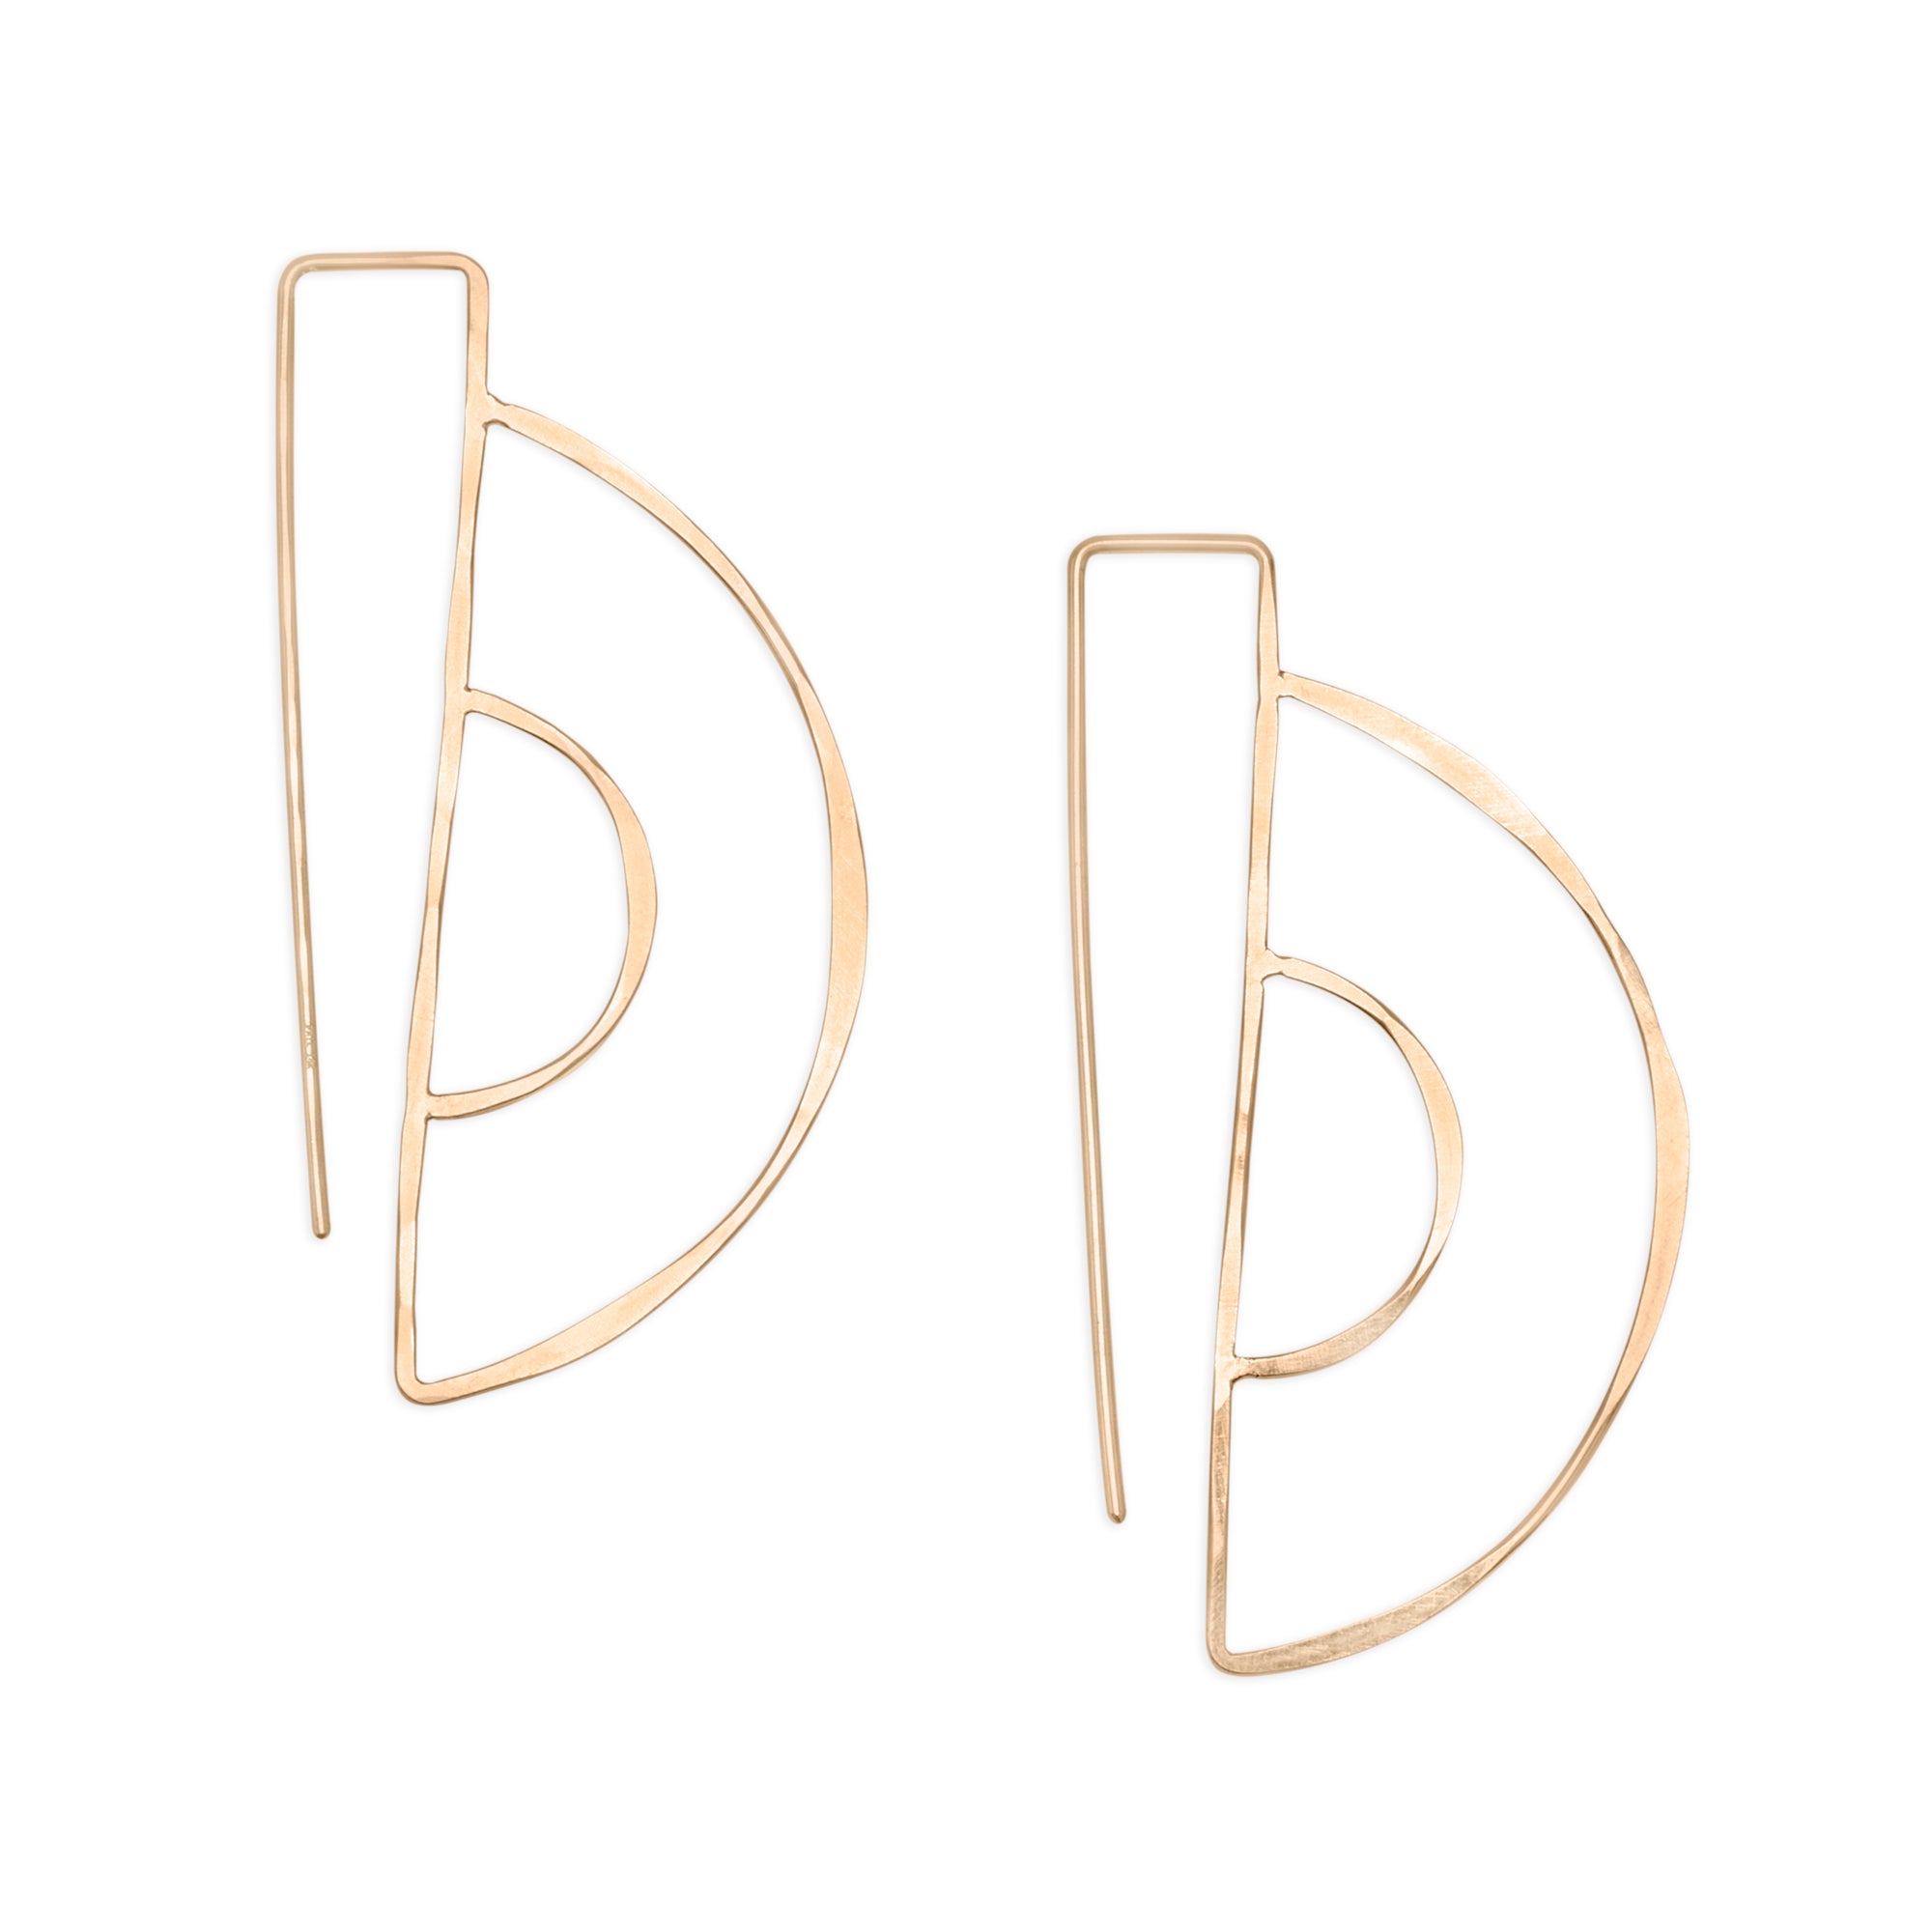 Parallel Hooks, delicate modern threader earrings in 14k gold, featuring hand forged double semicircles 